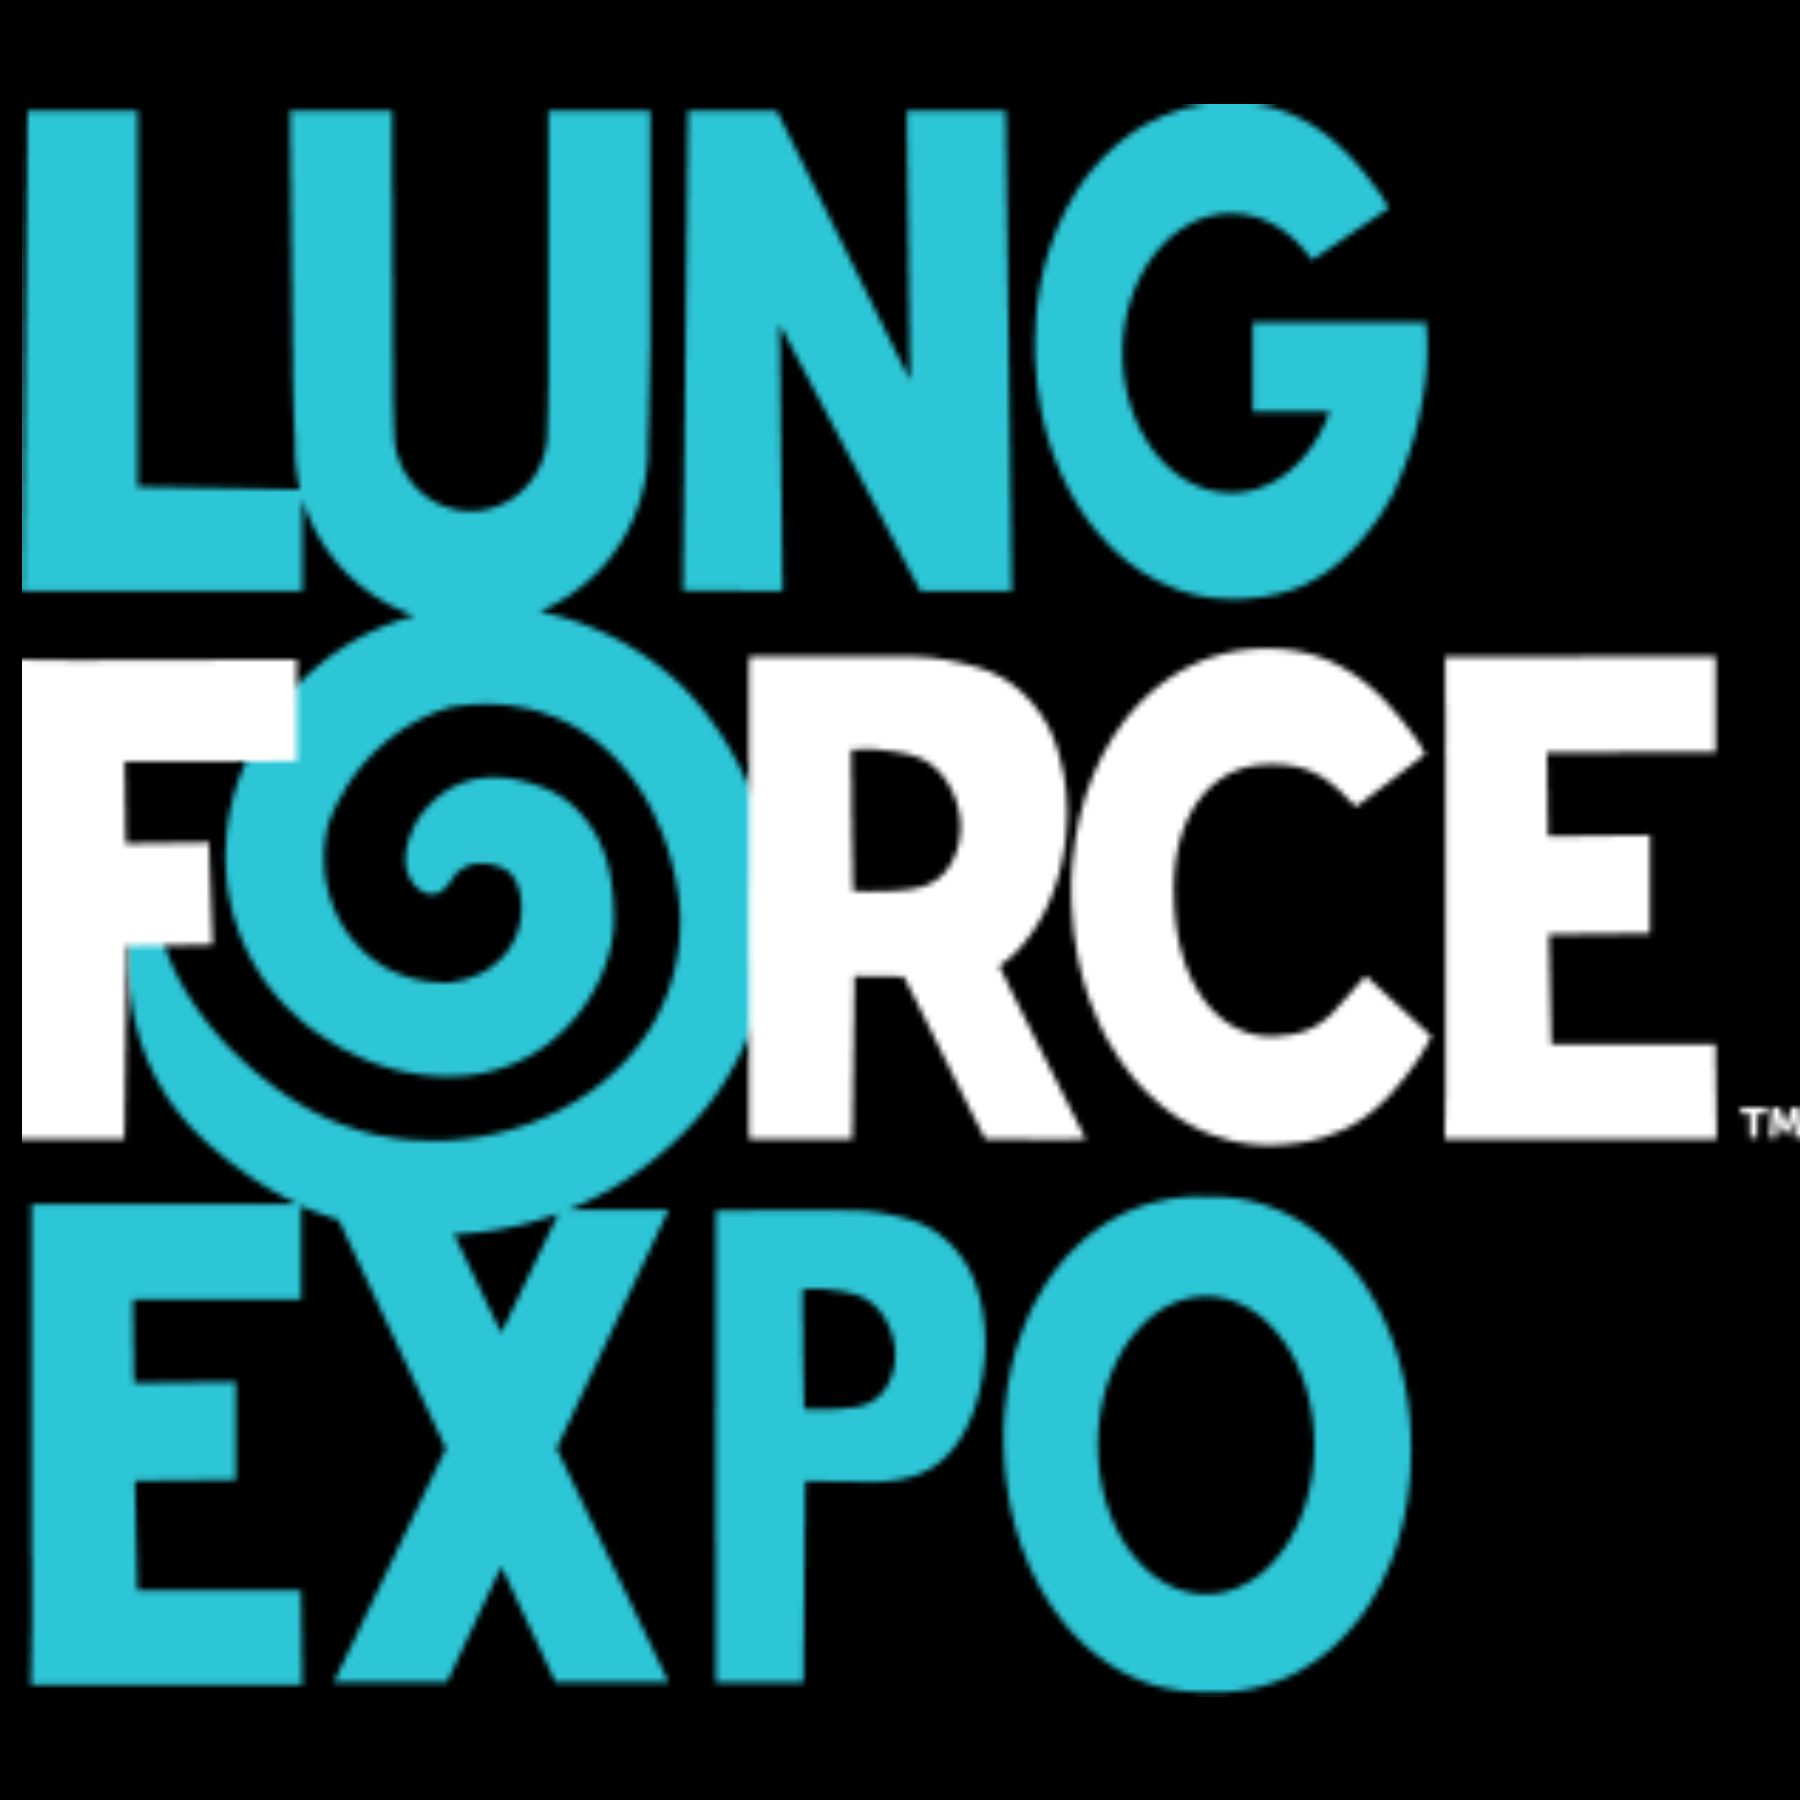 Lung Force Expo